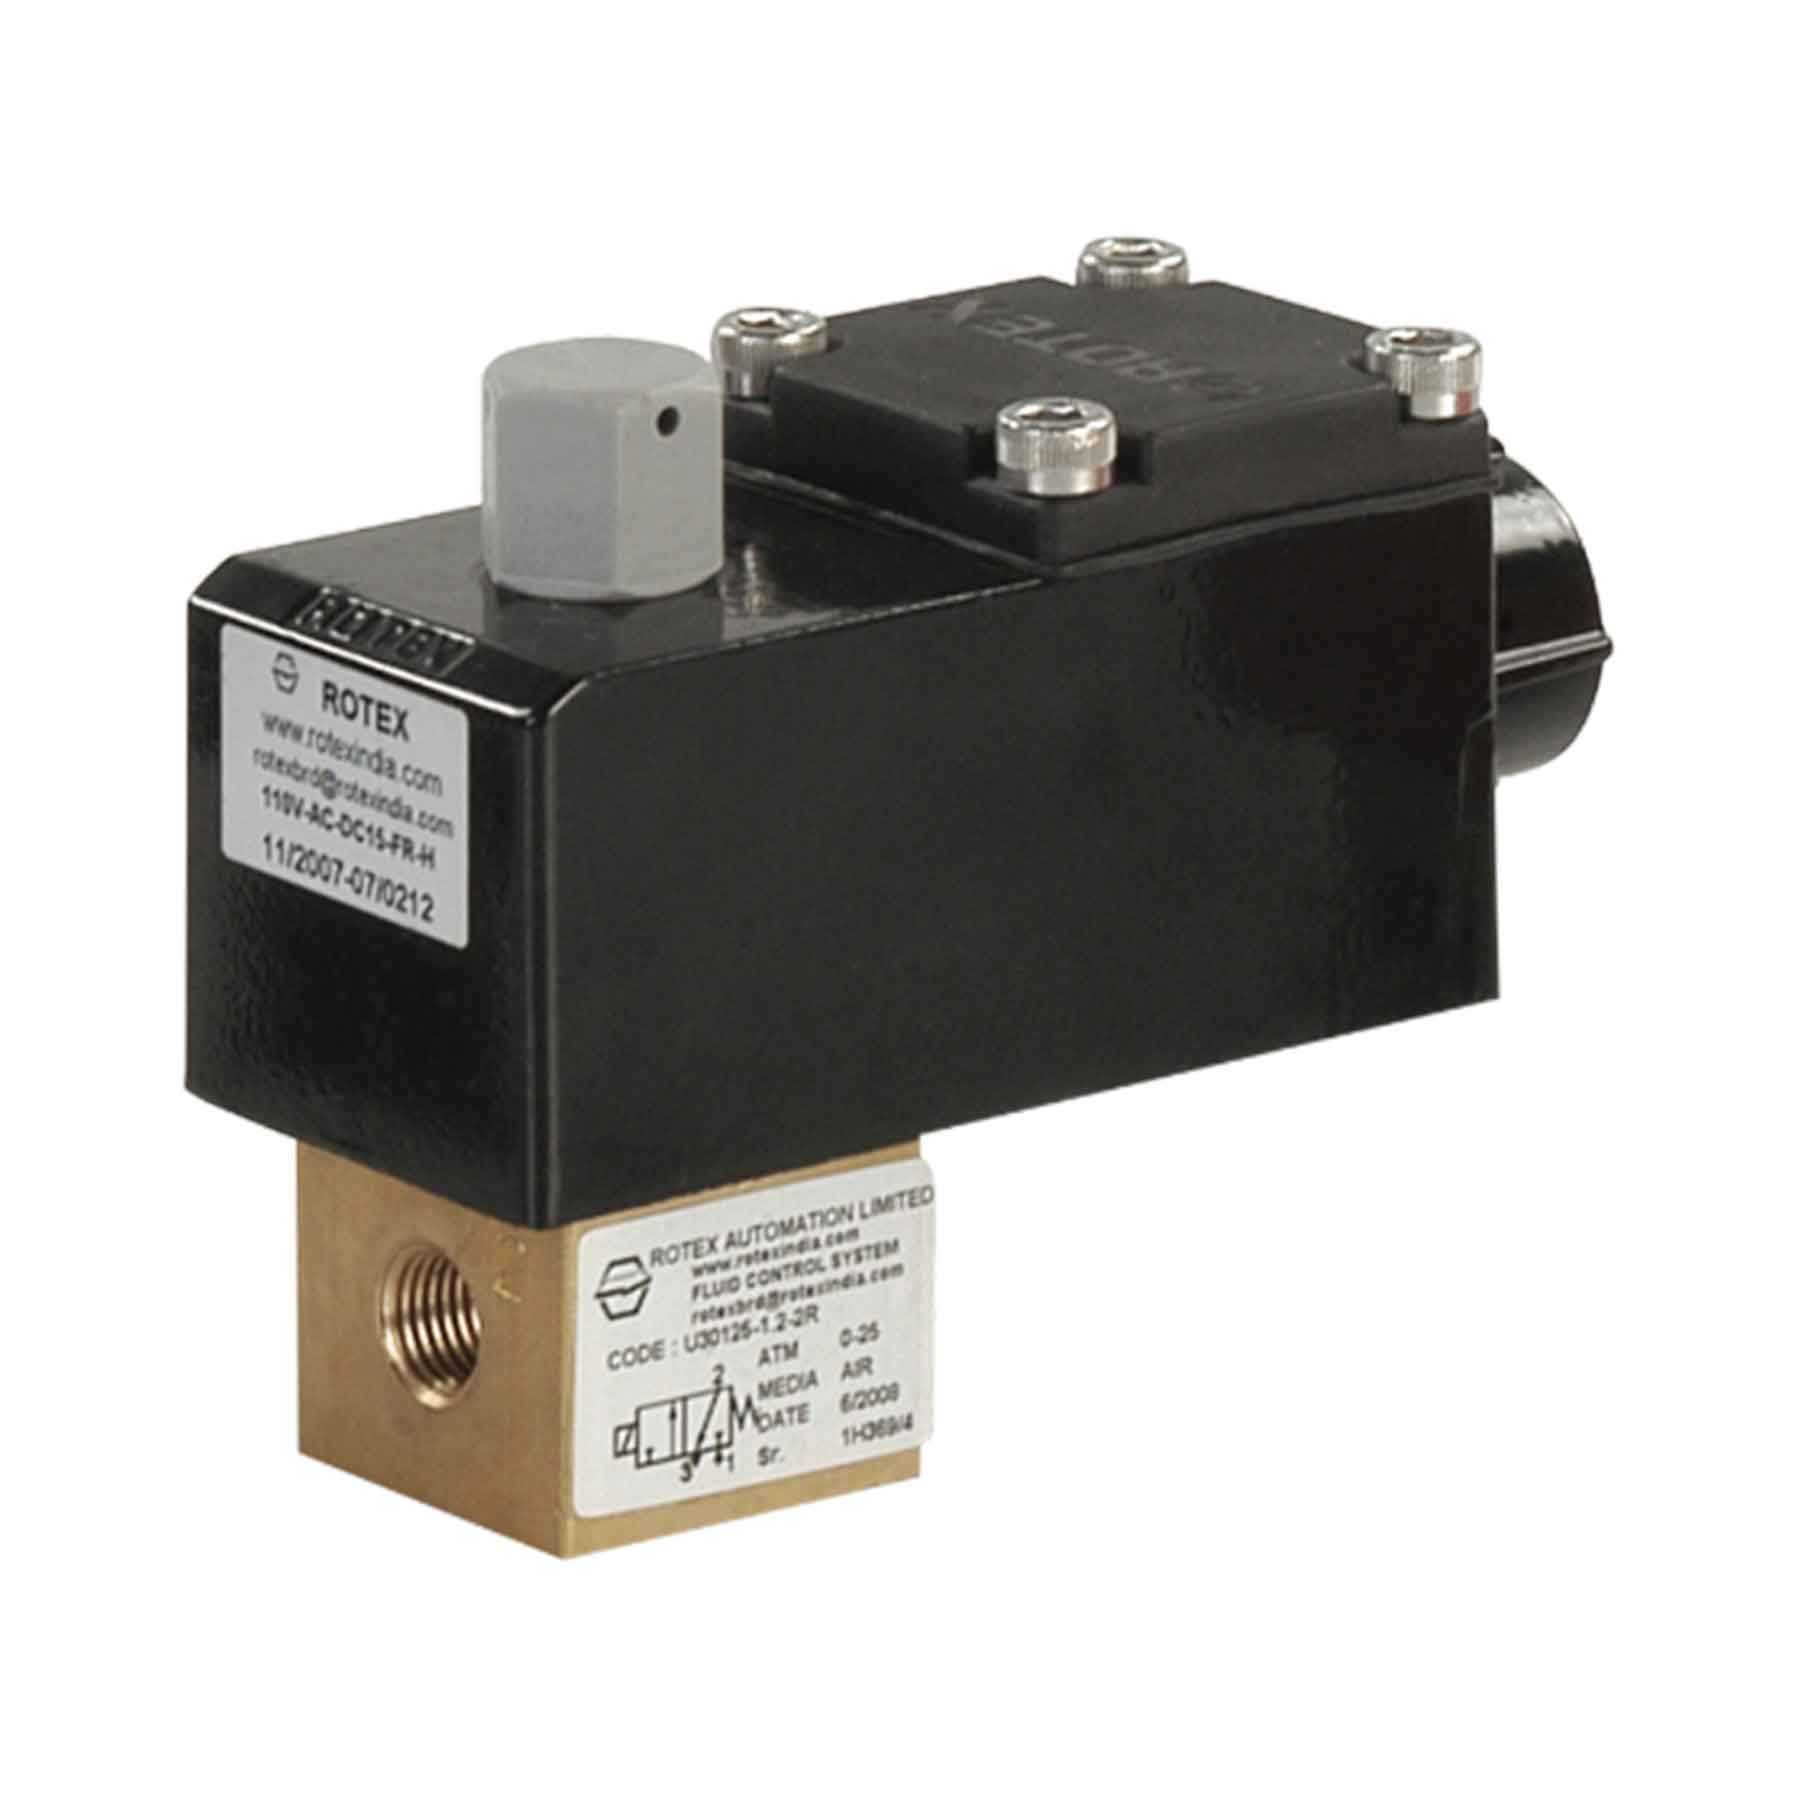 Rotex 2/2-Way Normally Closed Direct Lift Solenoid Valve 20101-3-2G-B2-S2+I-24V-DC-22-H-CE